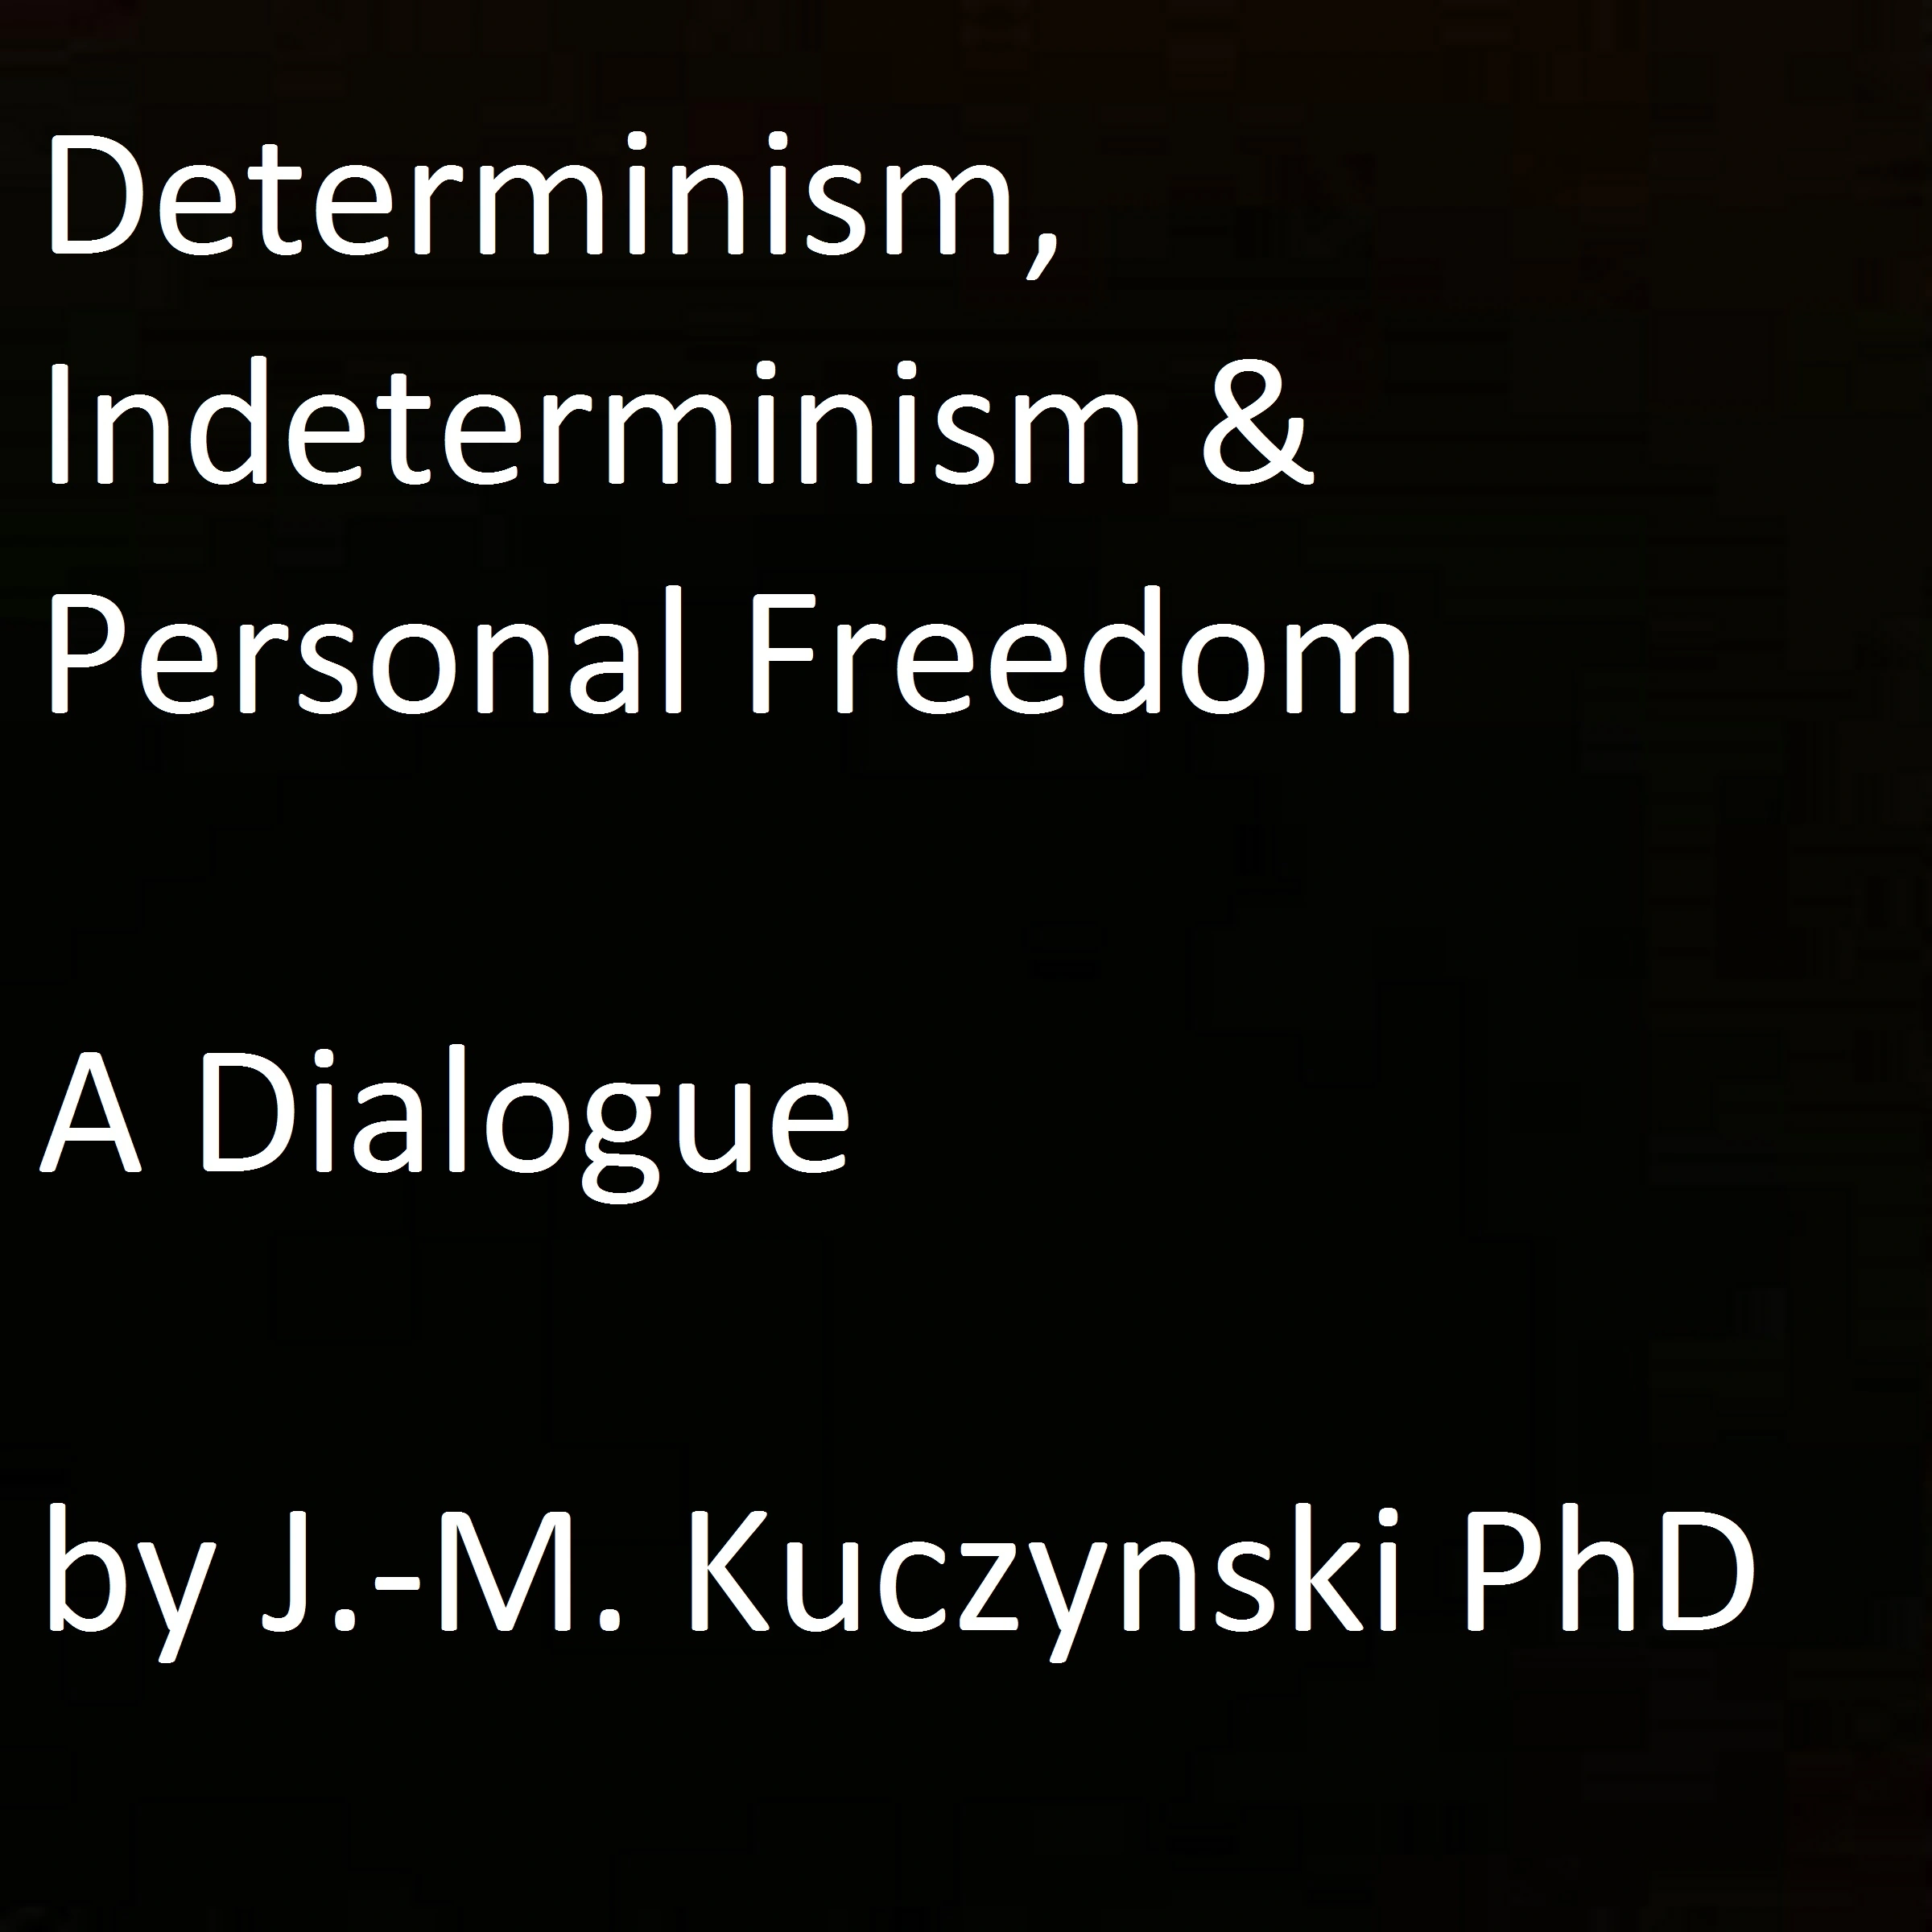 Determinism, Indeterminism, and Personal Freedom: A Dialogue Audiobook by John-Michael Kuczynski